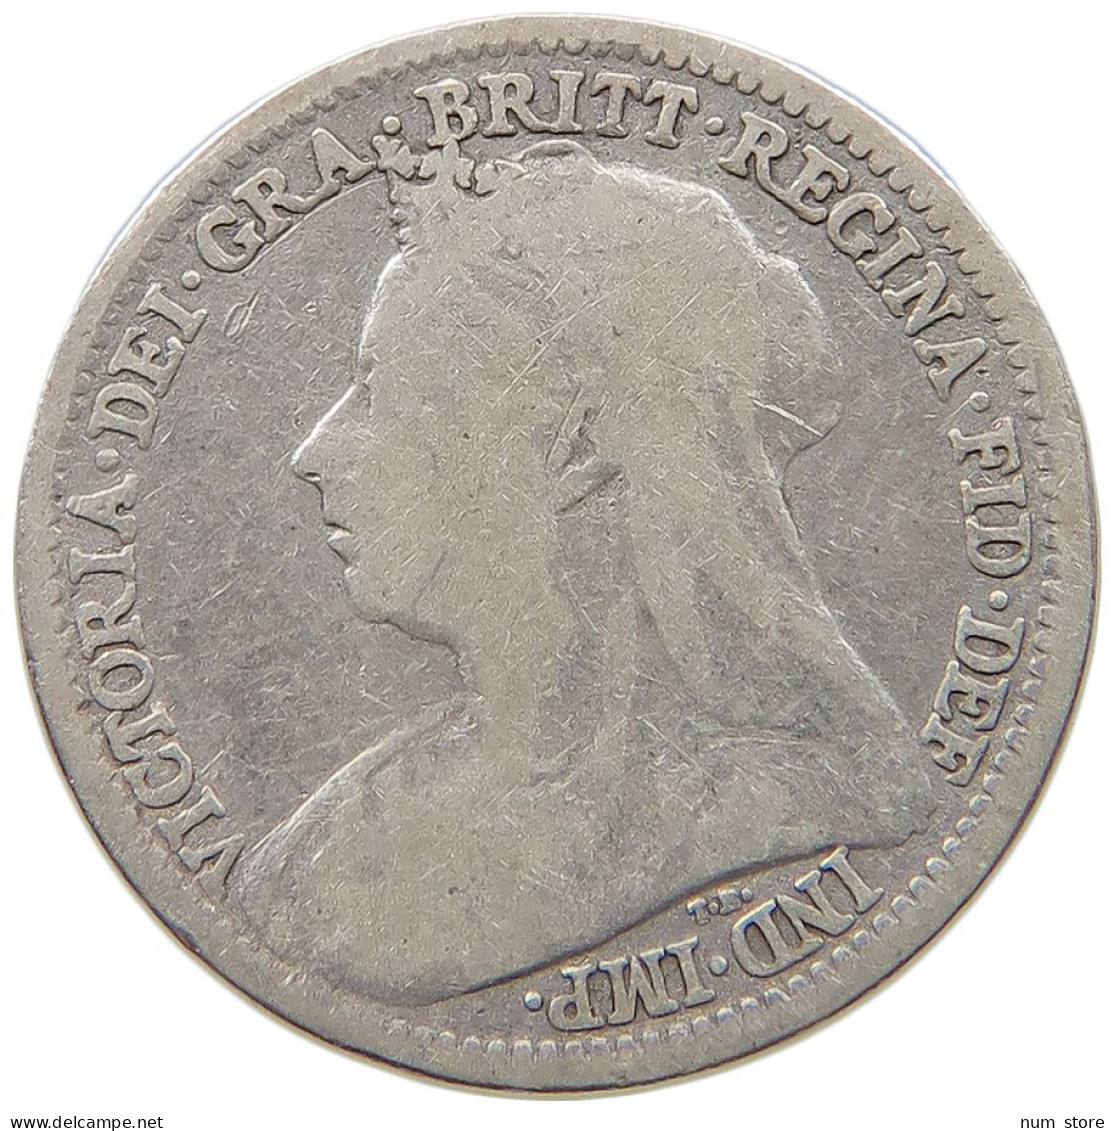 GREAT BRITAIN THREEPENCE 1897 Victoria 1837-1901 #a034 0055 - F. 3 Pence